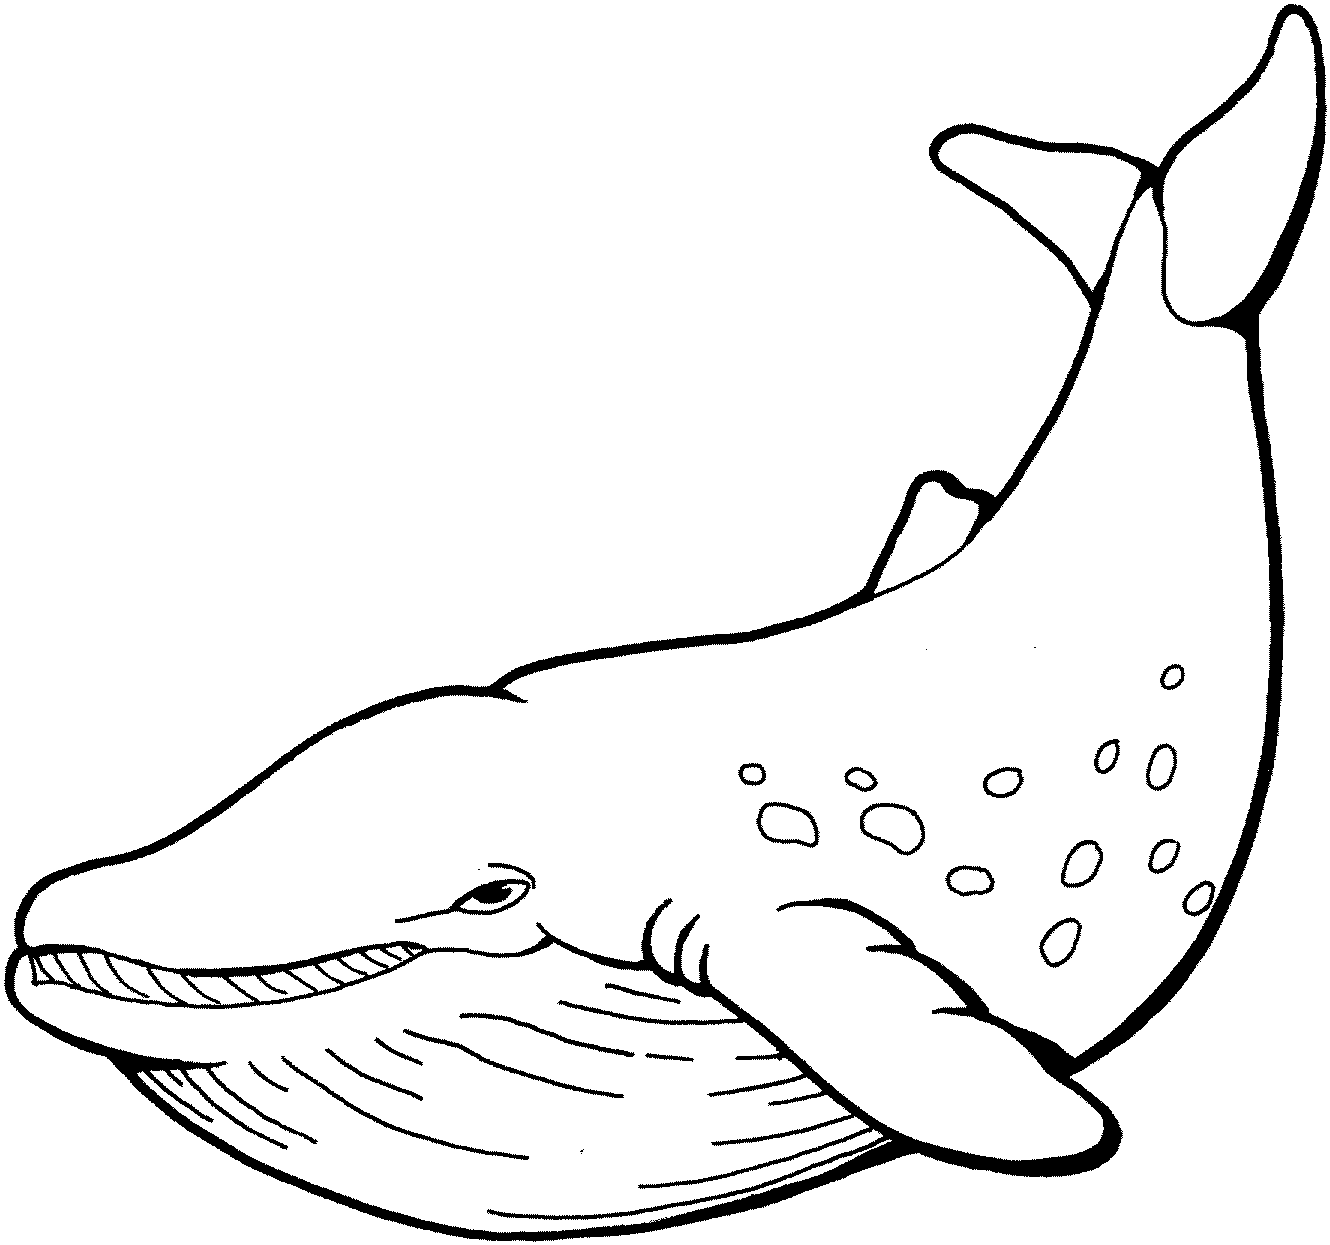 Whale Coloring Page : Coloring - Kids Coloring Pages